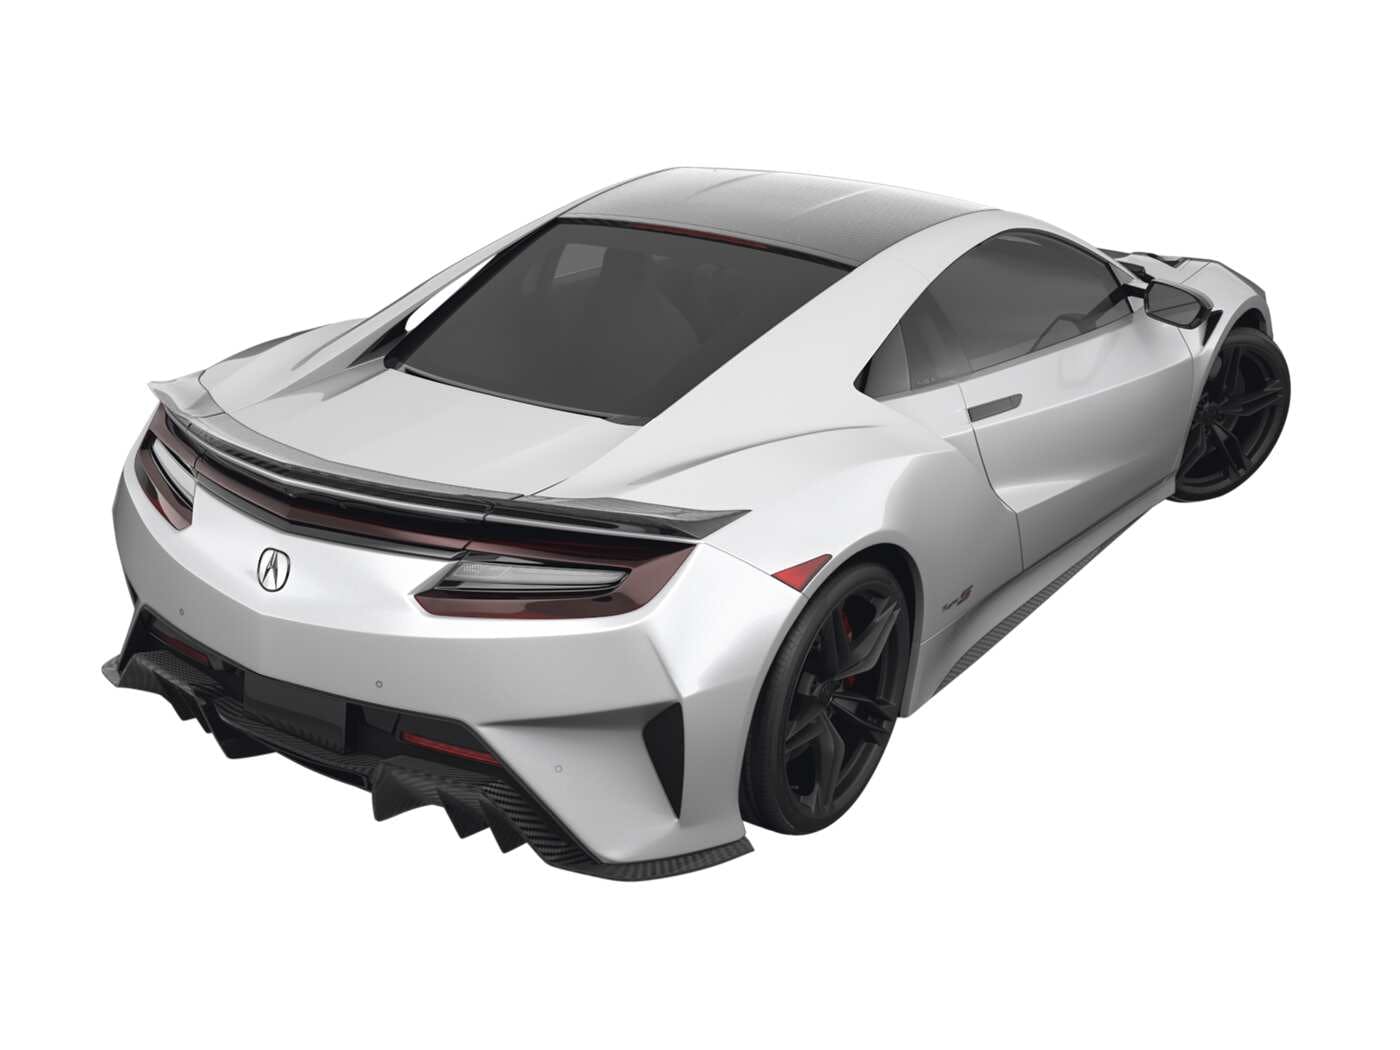 2022 Acura NSX Prices, Reviews, and Pictures